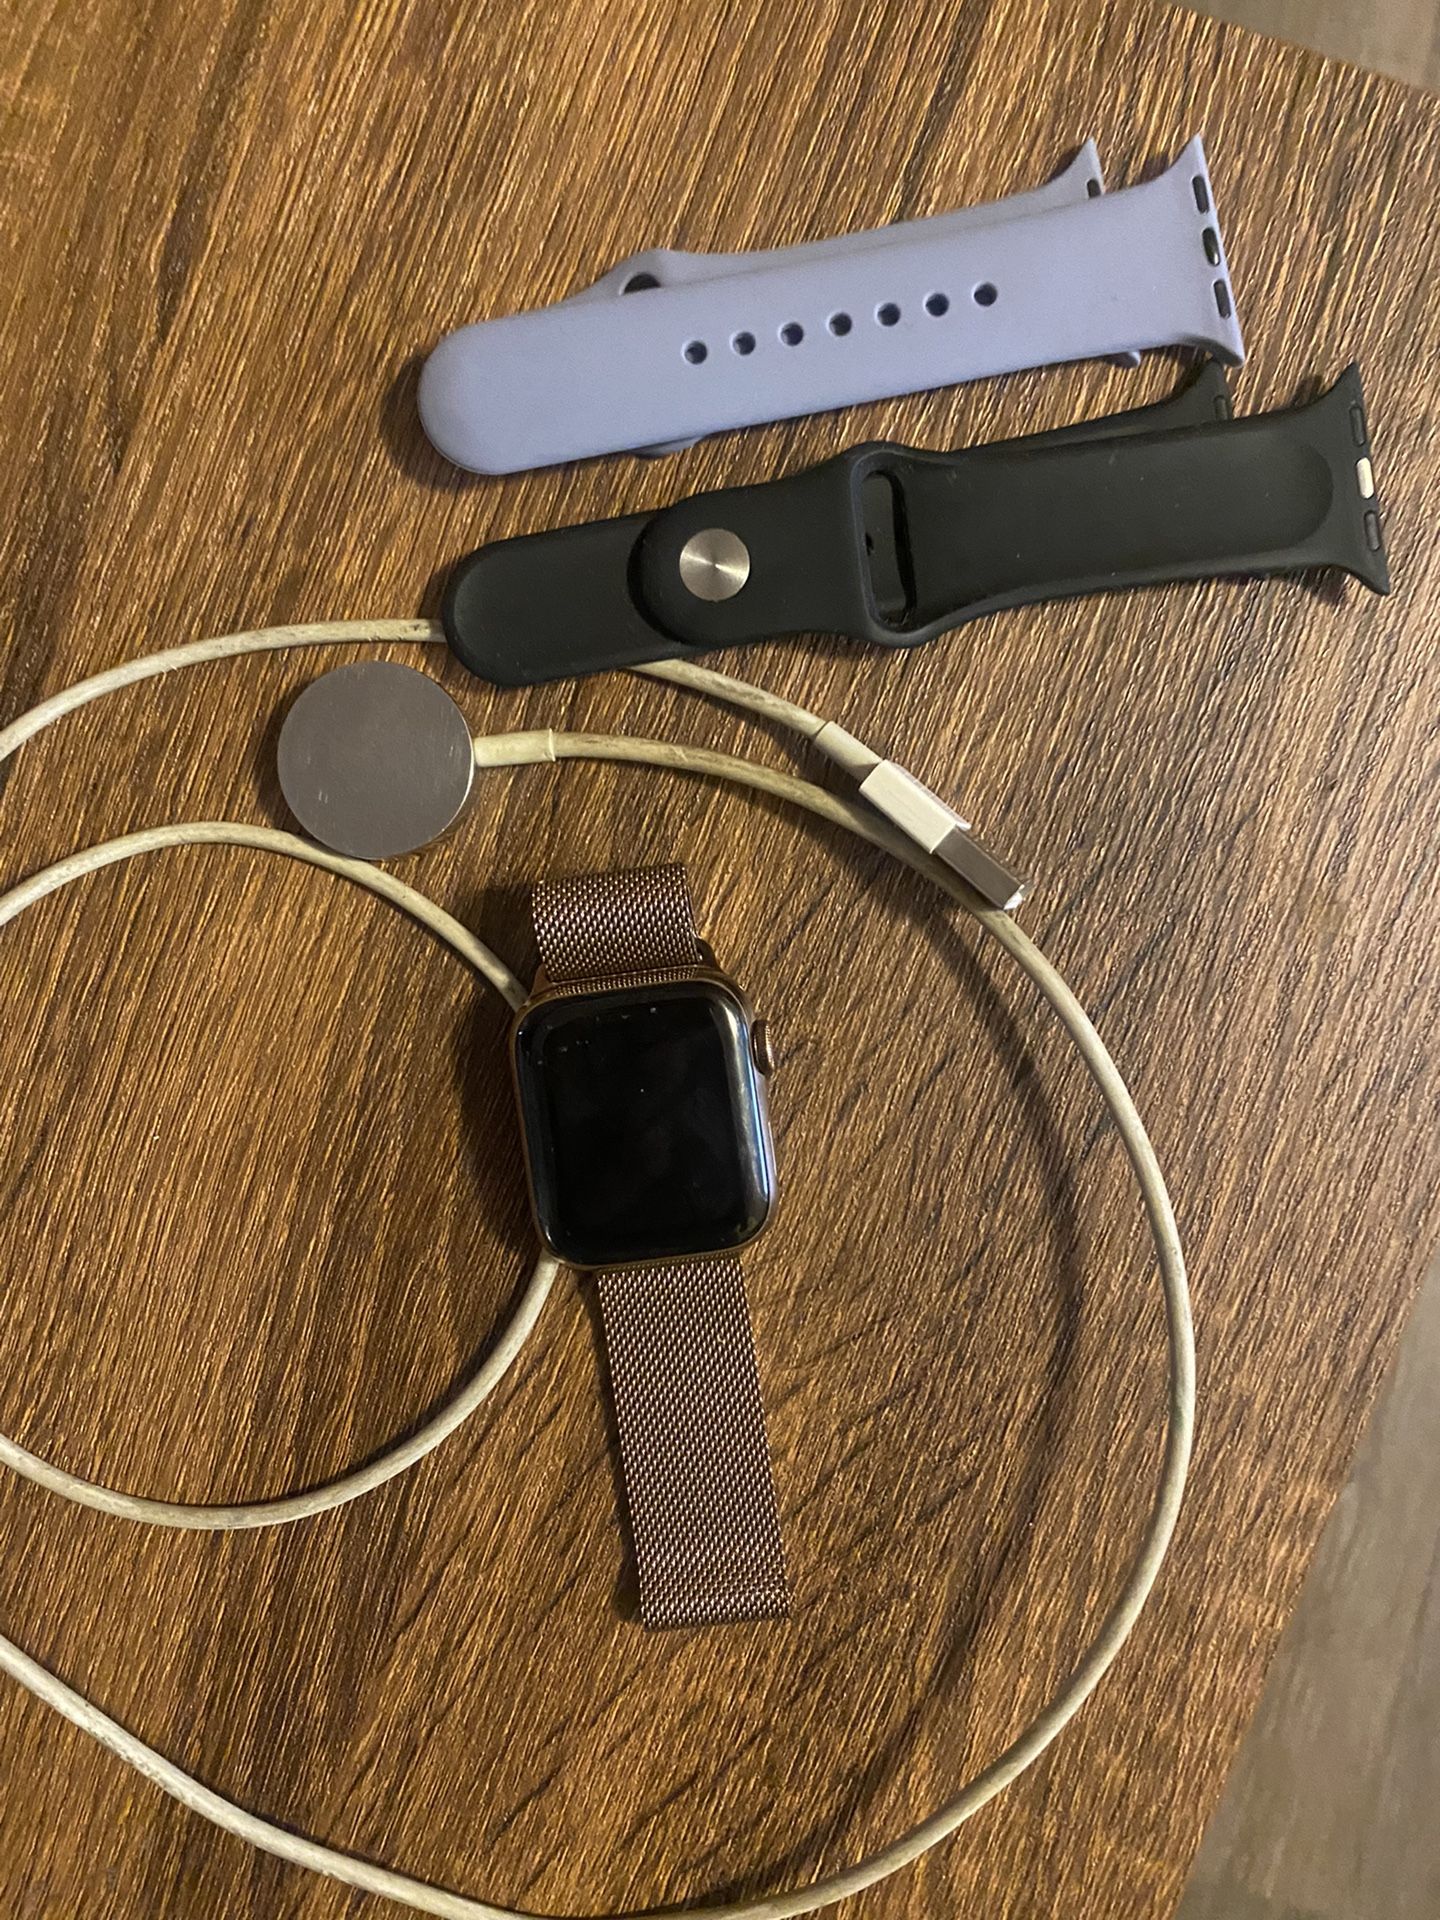 APPLE WATCH SERIES 4 ROSE GOLD EDITION 